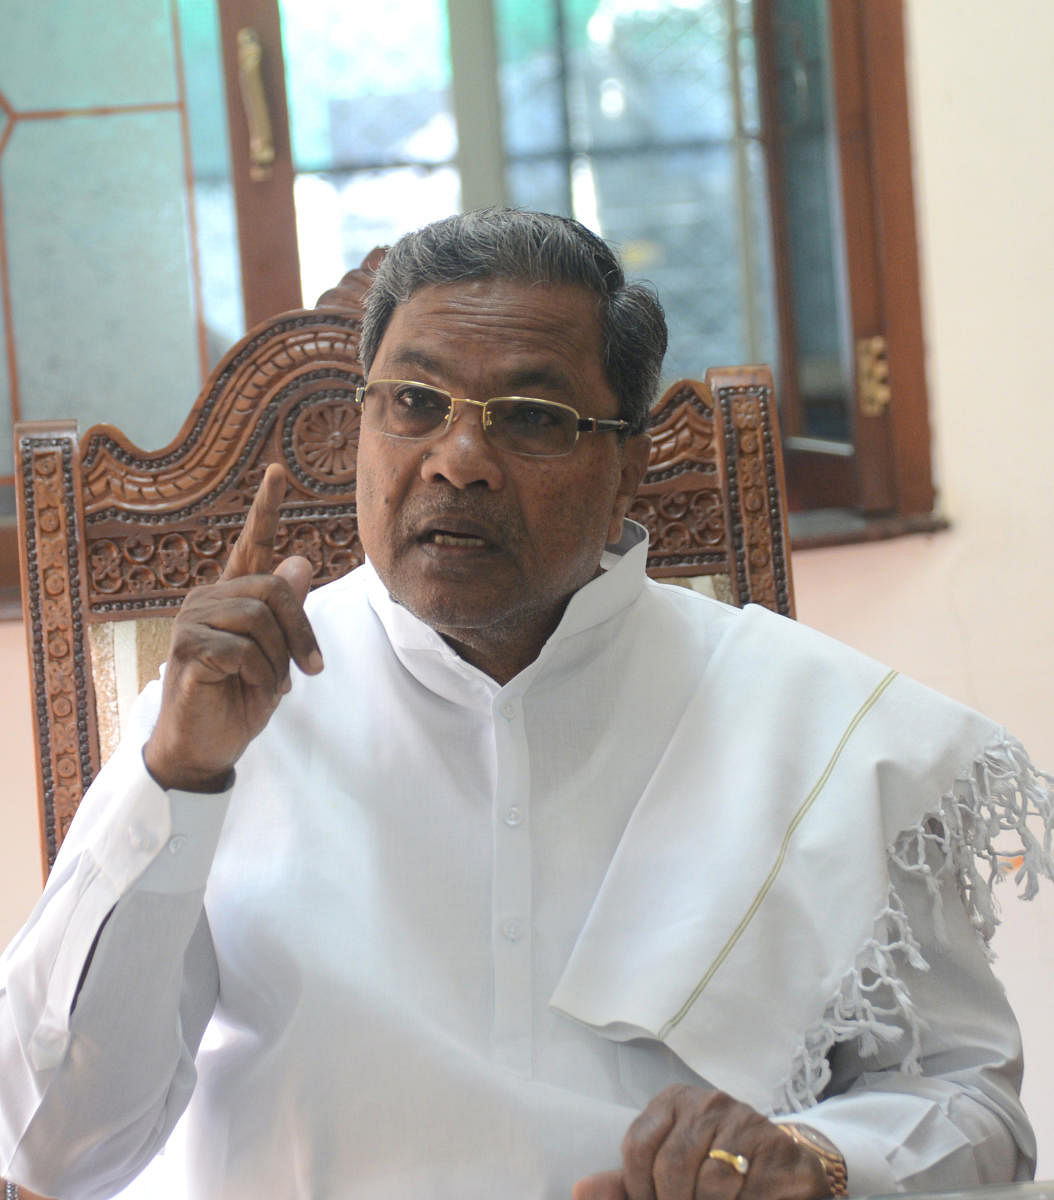 “The saffron party has come to power through unethical means by buying legislators. It all began with Anand Singh," Siddaramaiah told the Vijayanagar voters. (File Photo)